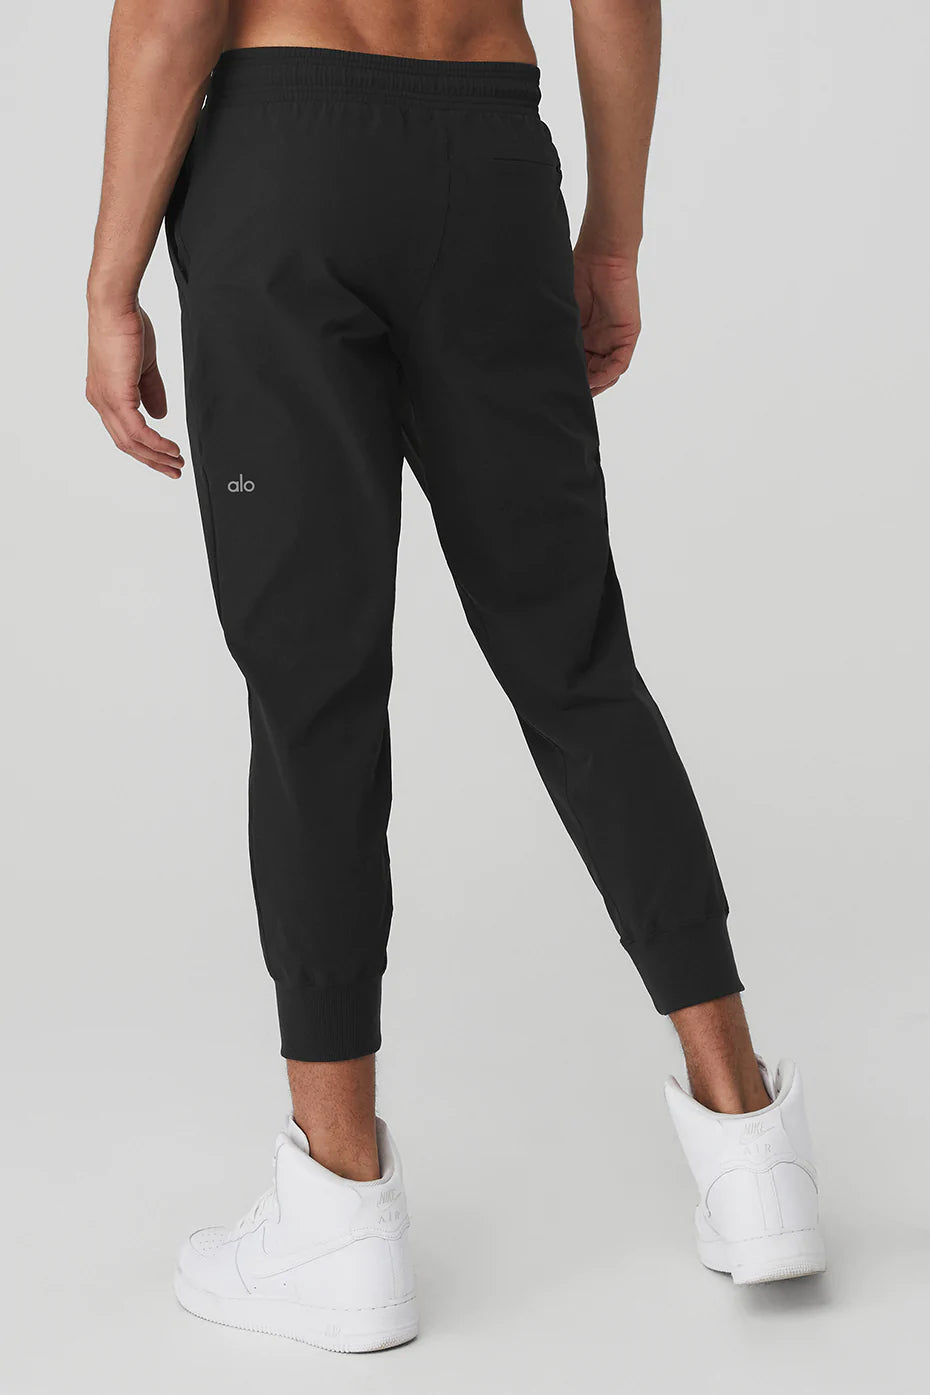 Alo Yoga Repetition Pant – The Shop at Equinox